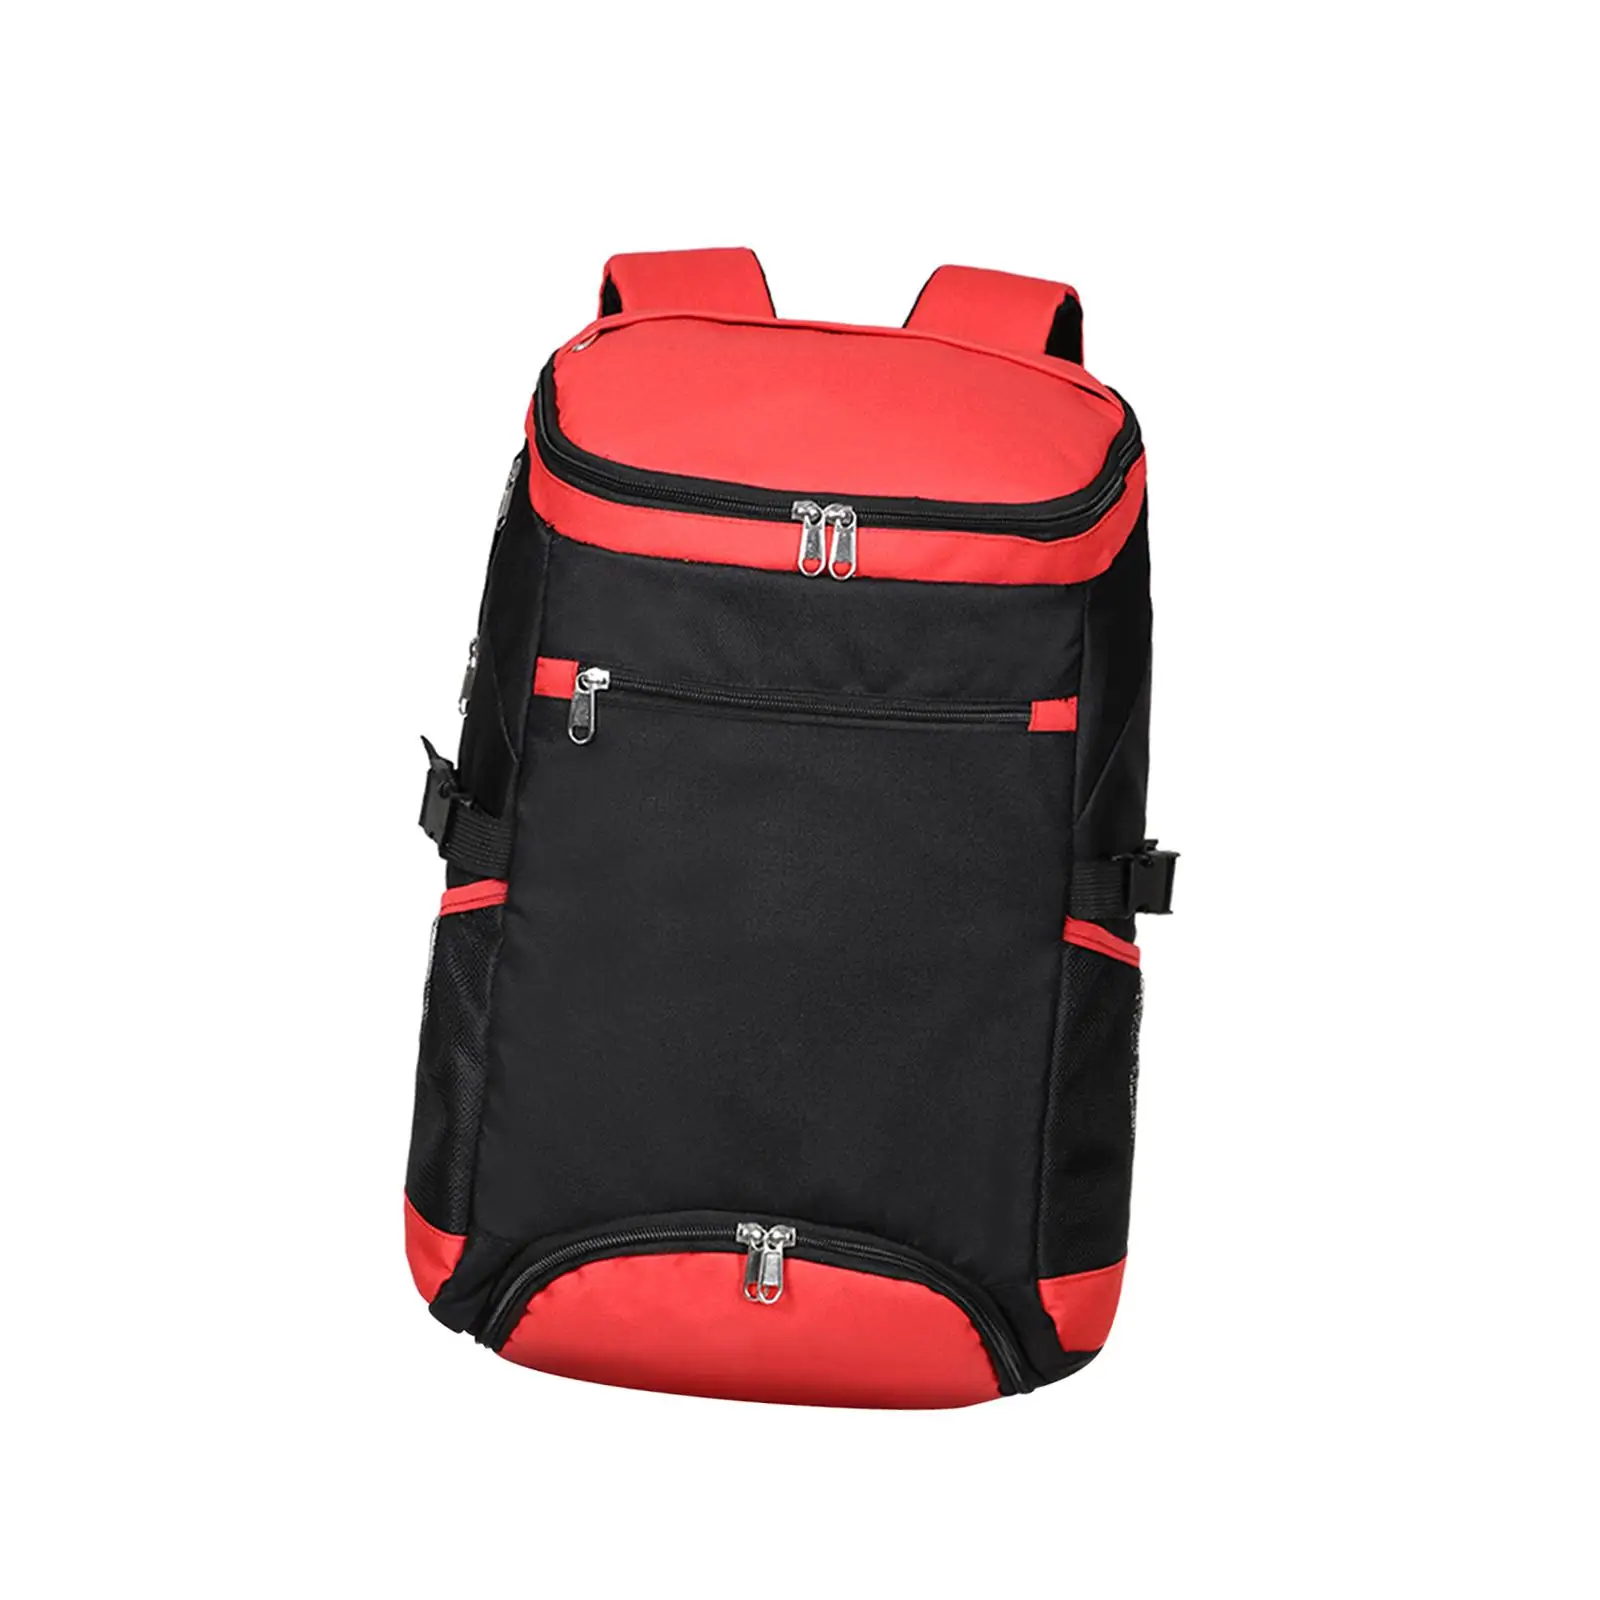 Tennis Backpack Backpack for Outdoor Sports Badminton Squash Racquets